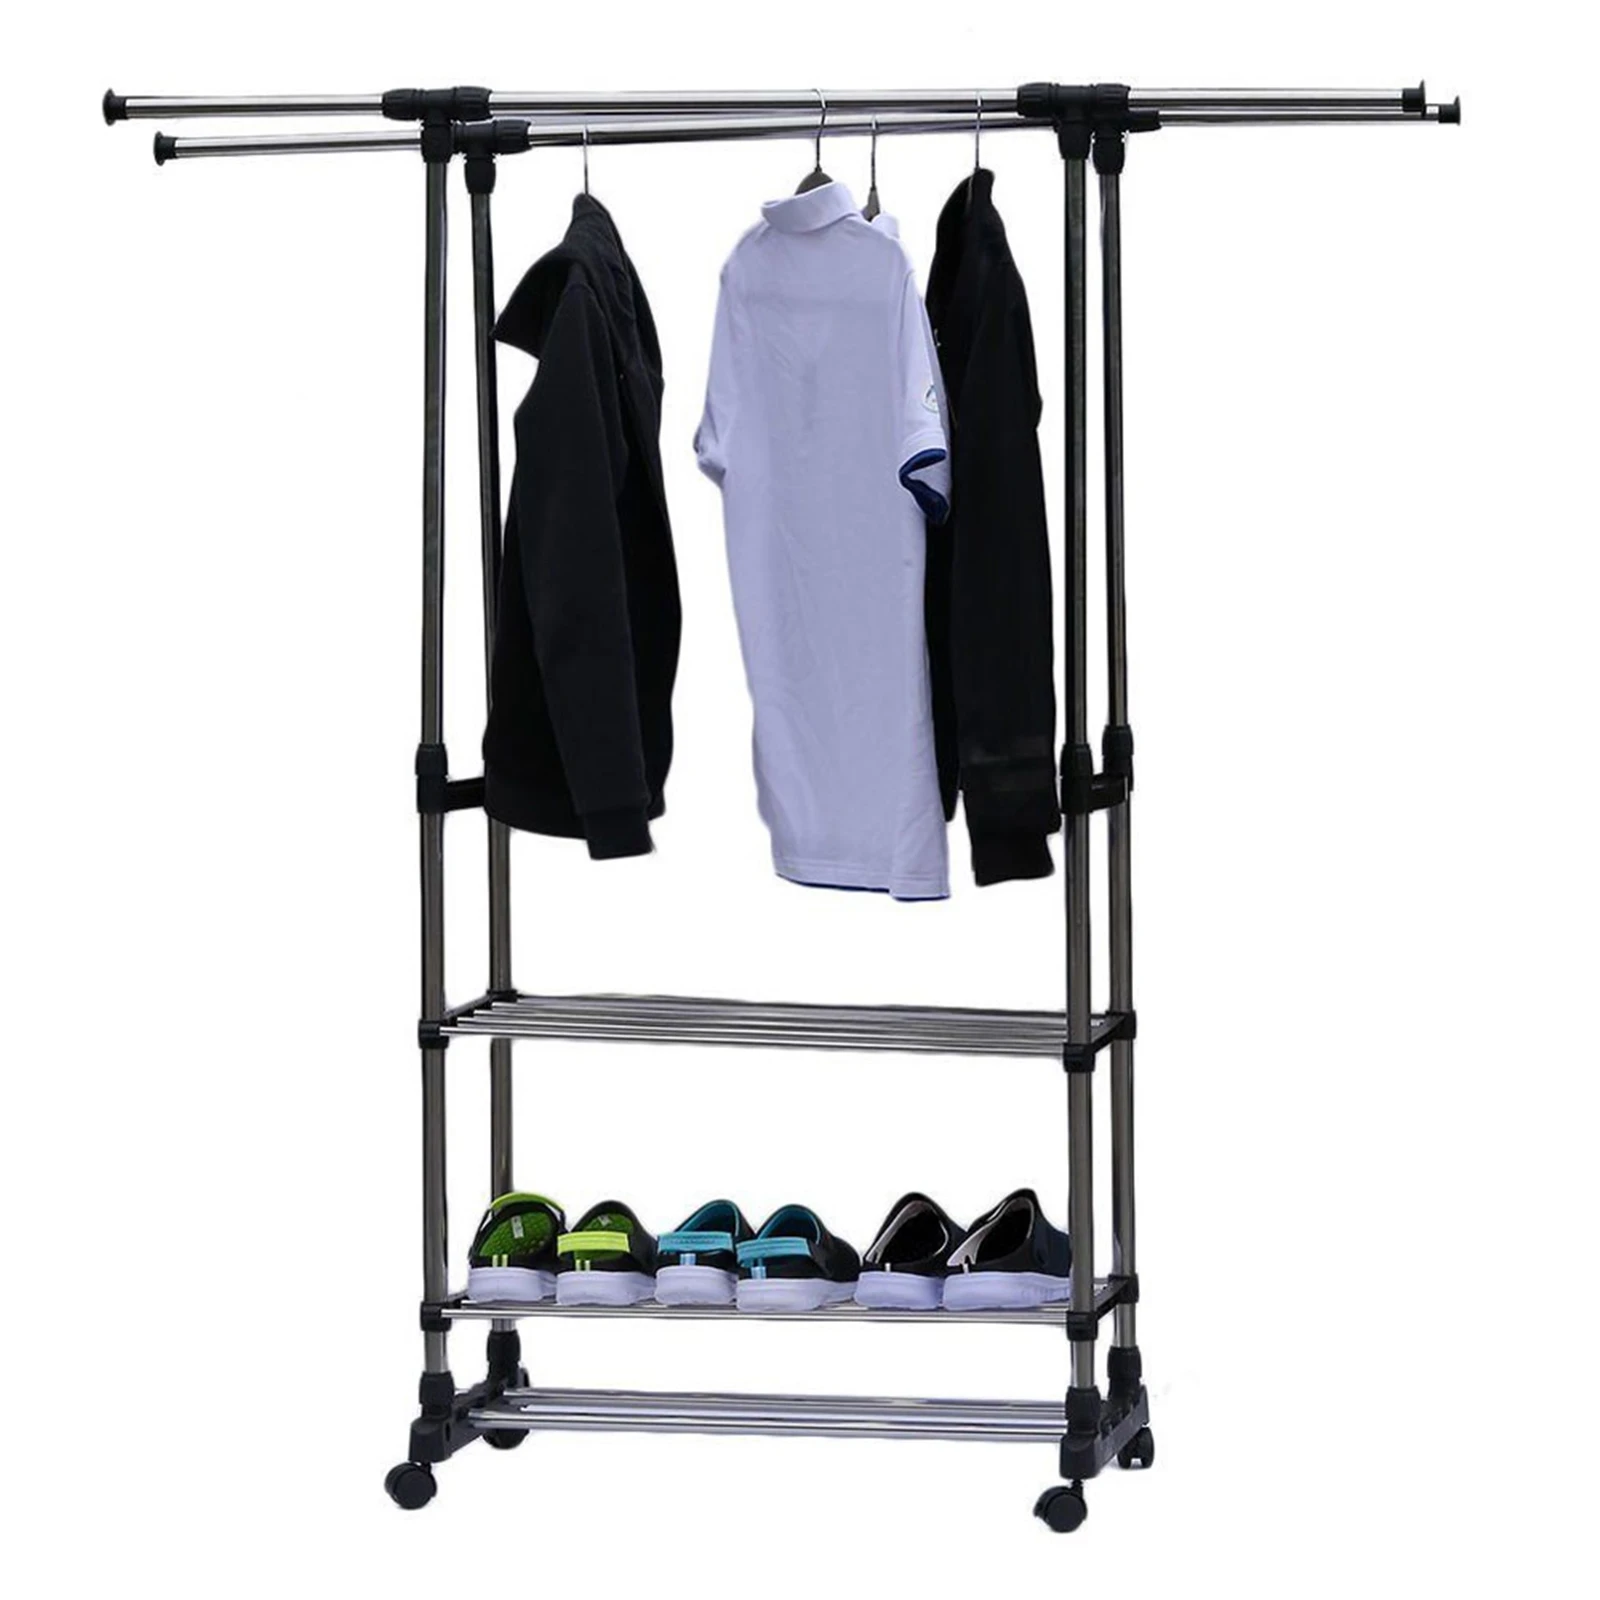 

Dual Bars Horizontal & Vertical Telescope Style 3 Tiers Stainless Steel Clothing Airing Holder Garment Shoe Rack[US-Stock]